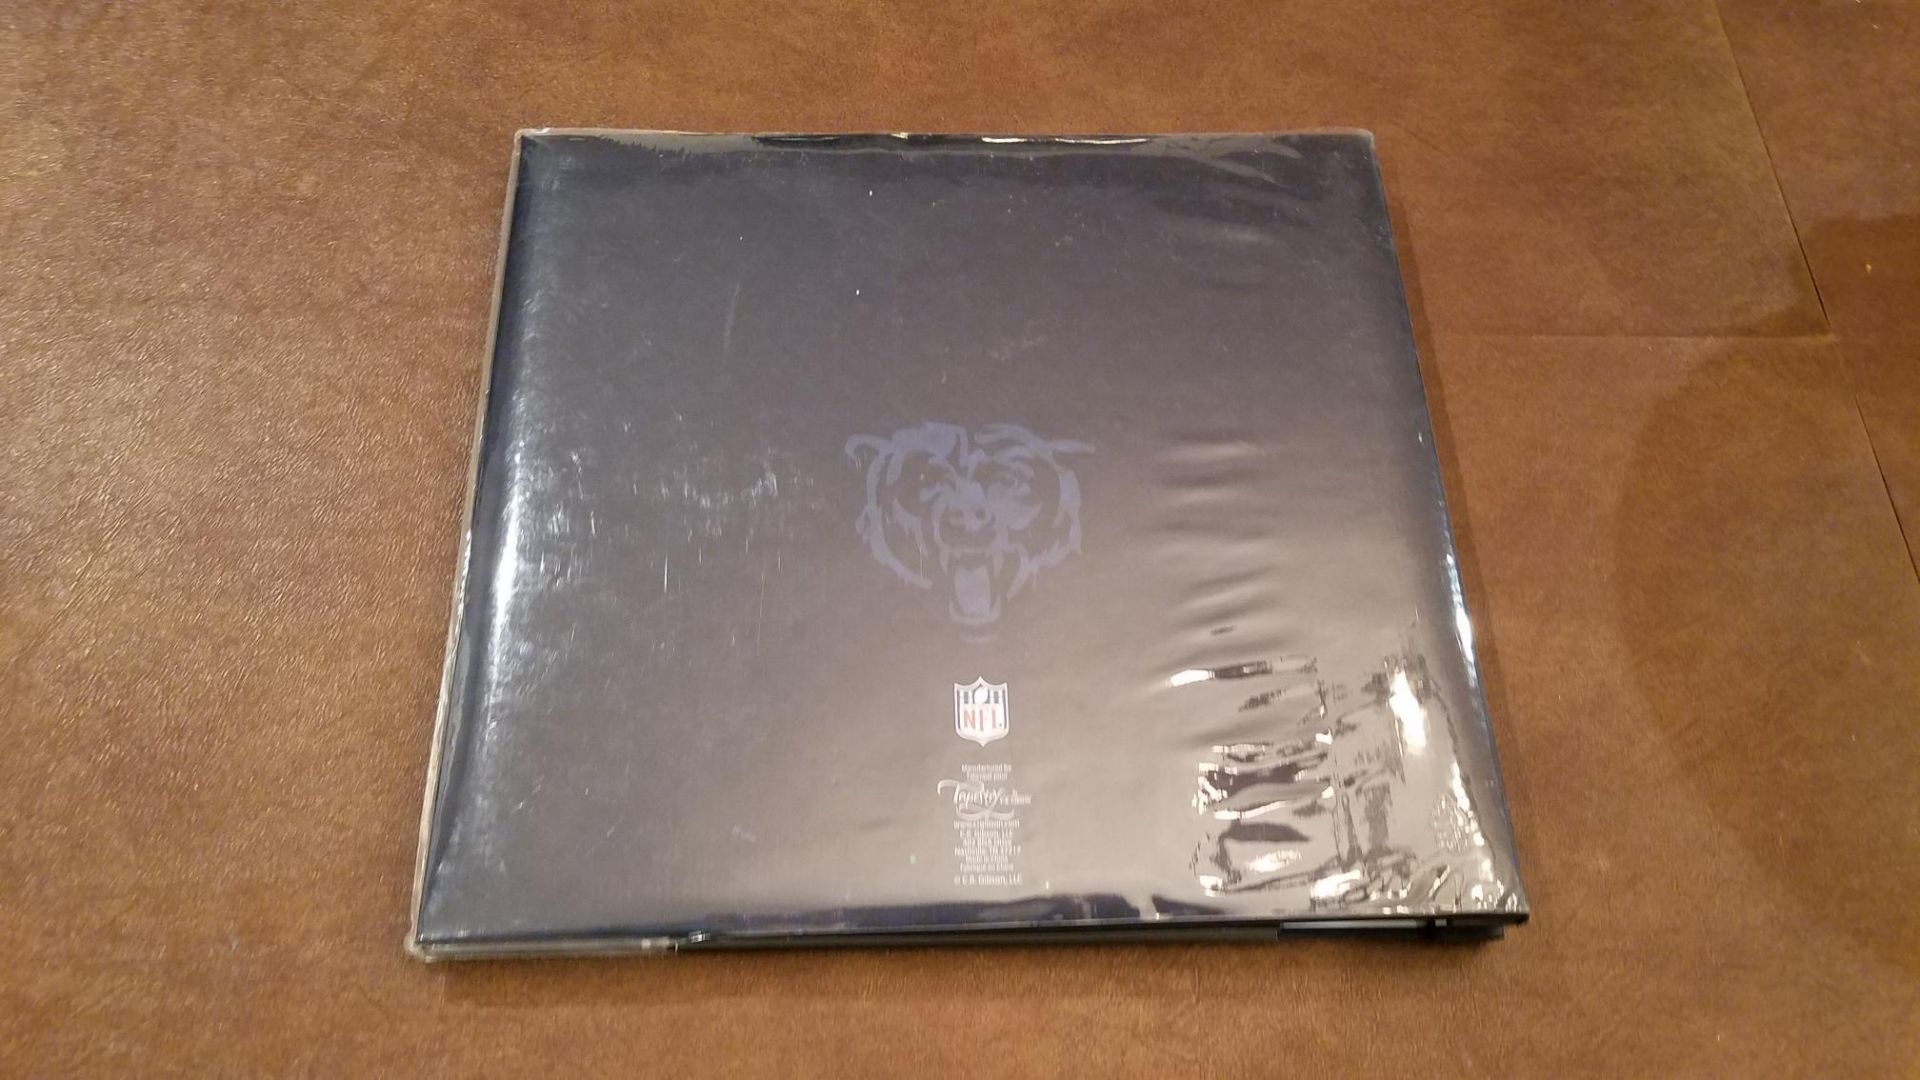 Chicago Bears 16-Page Scrapbook (Still in Protective Plastic) - Image 14 of 14